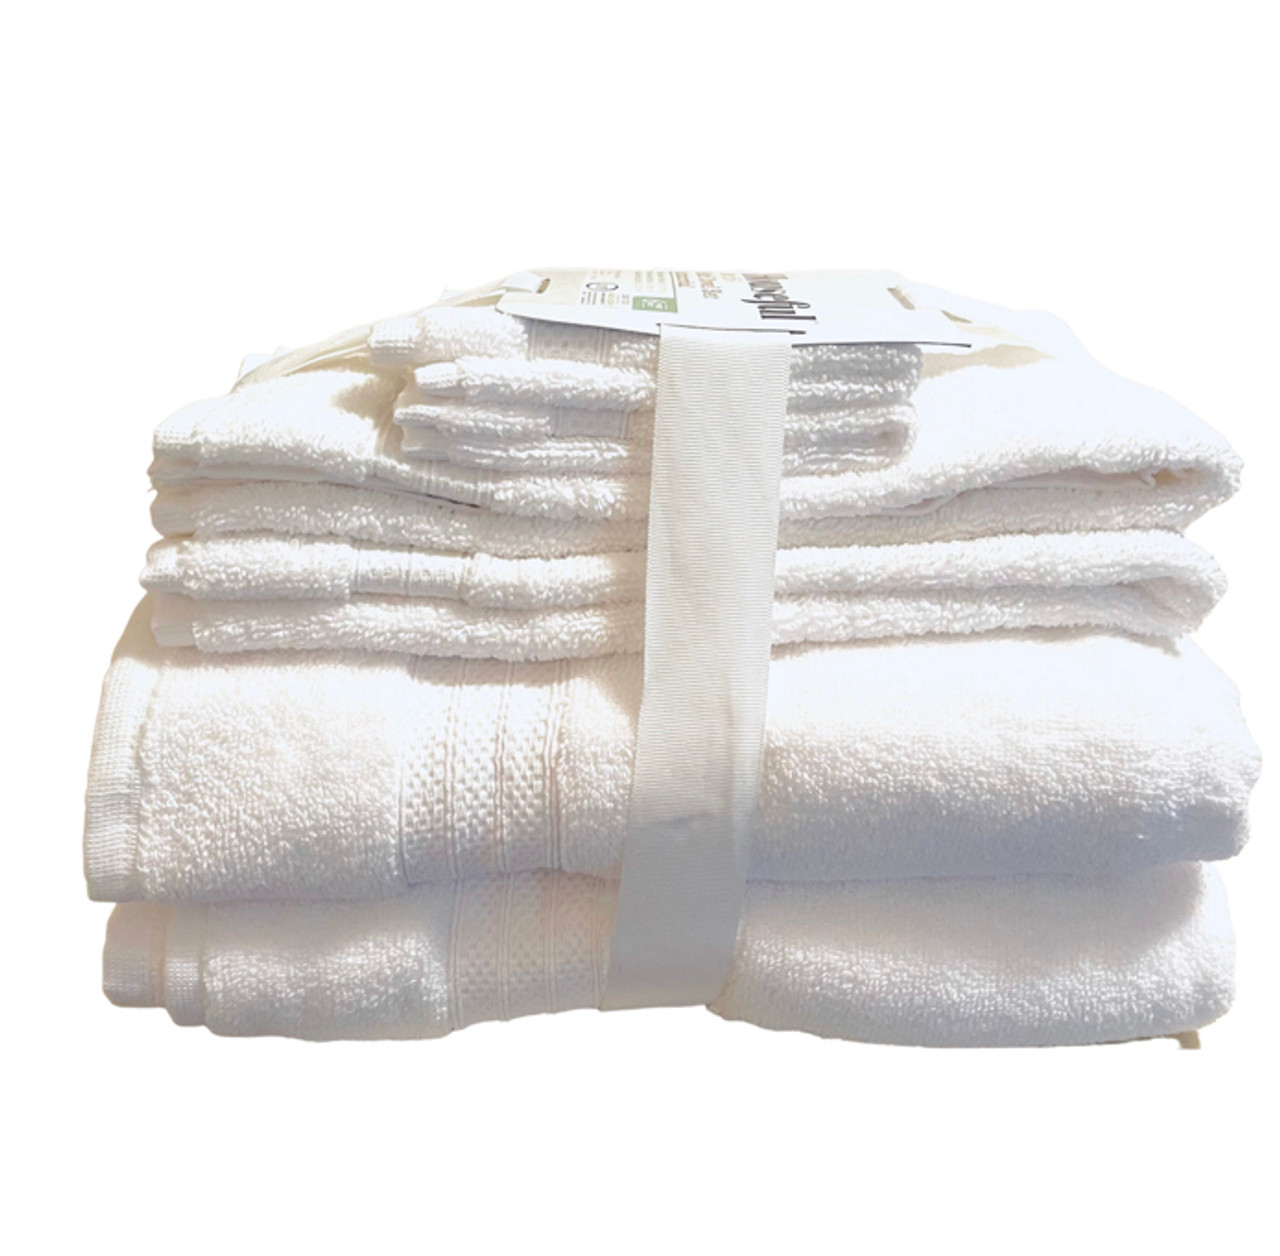 ALL ABOUT SIX - Tommy Hilfiger Bath Towels 100% Cotton